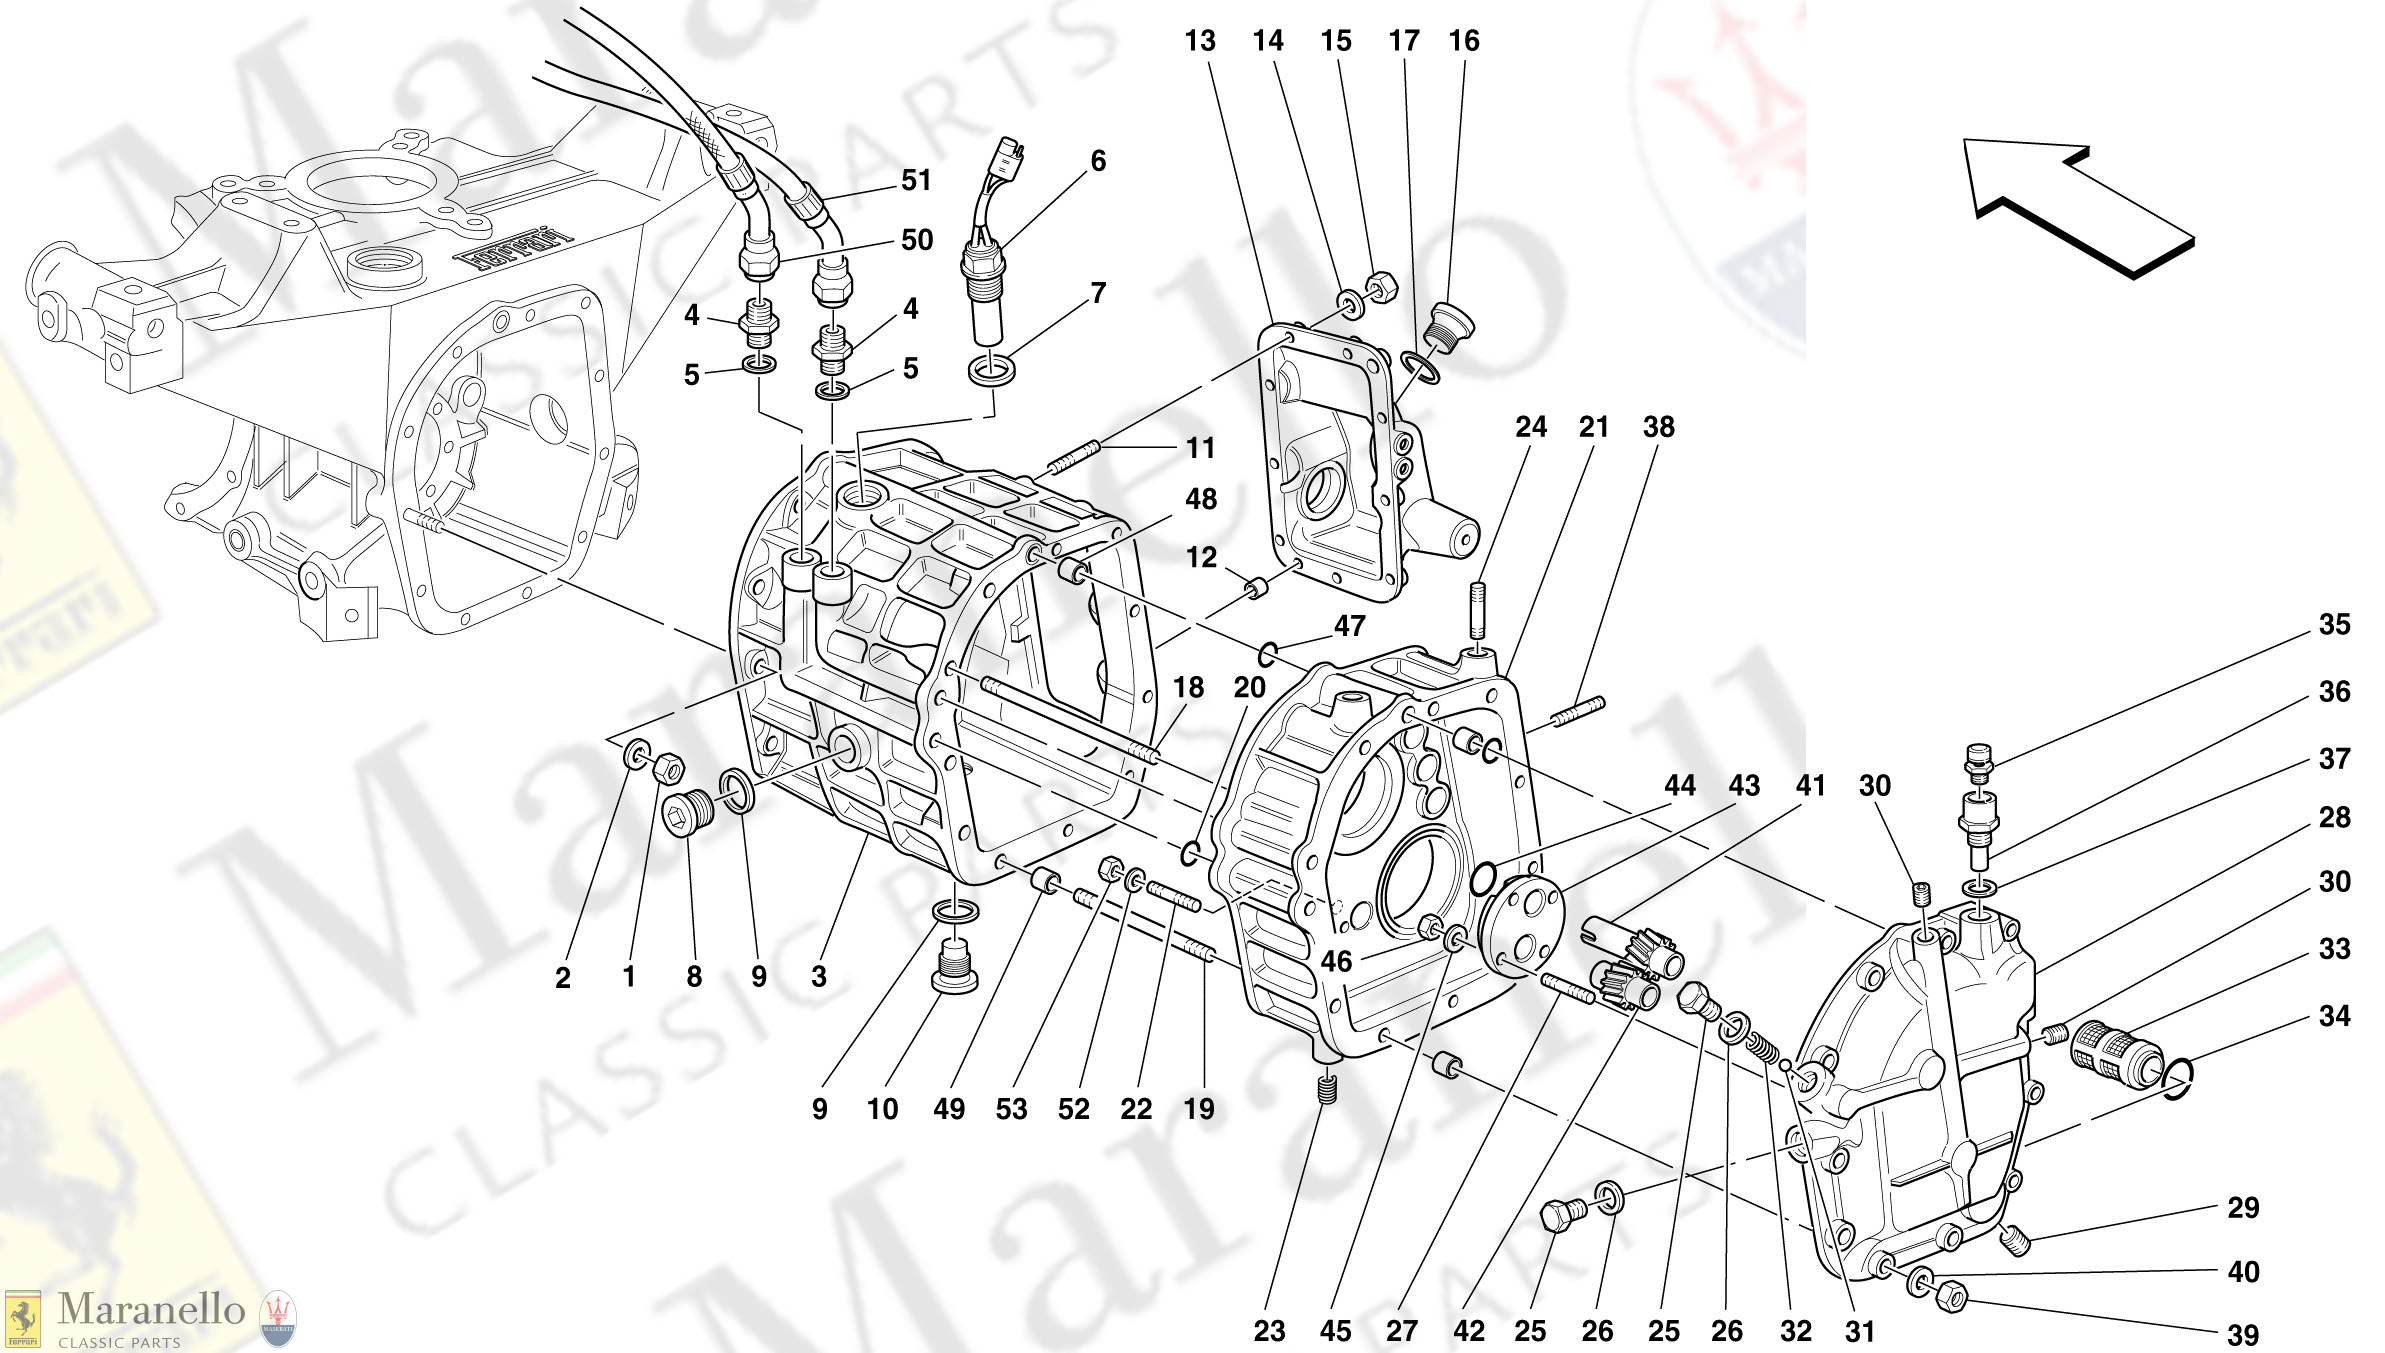 029 - Rear Part Gearboxes Housing - Covers And Lubrication